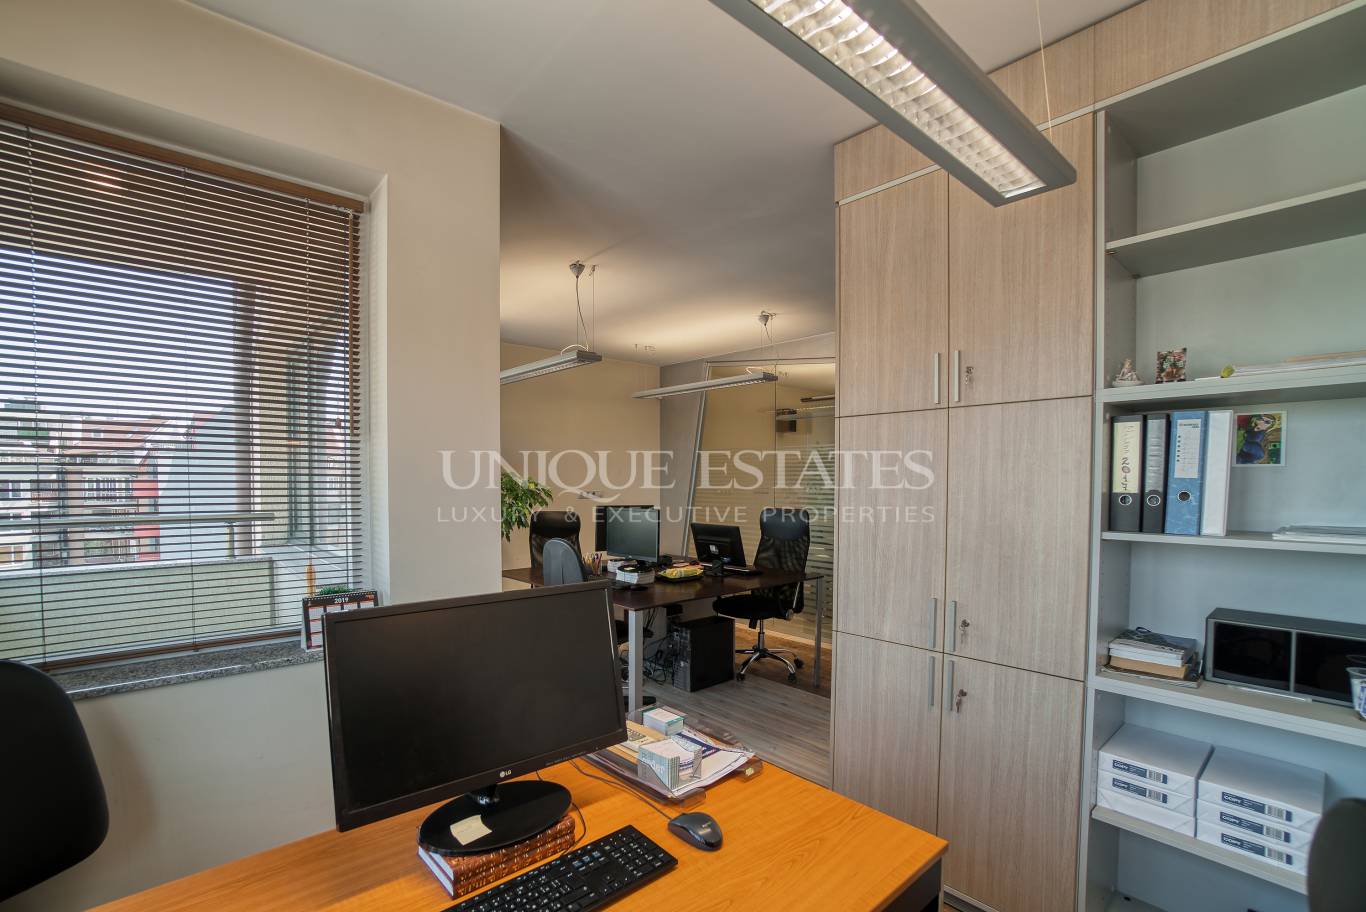 Office for rent in Sofia, Downtown with listing ID: K19190 - image 9